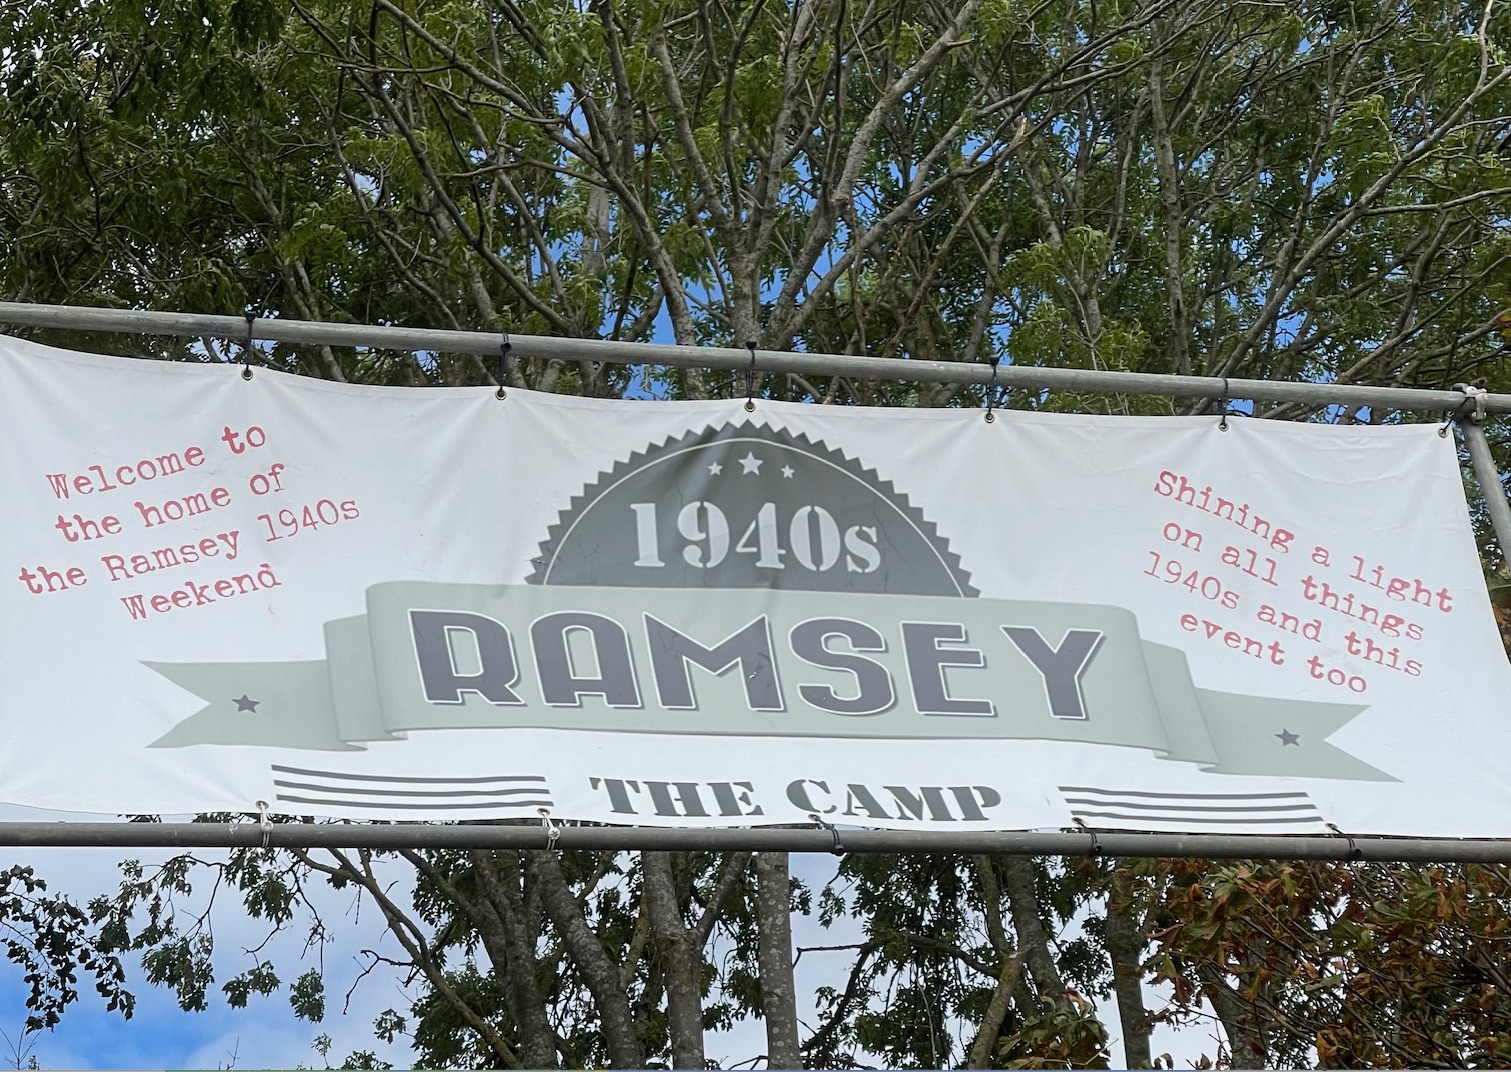 Ramsey and the 1940’s weekend – Cambridgeshire – What to see and do